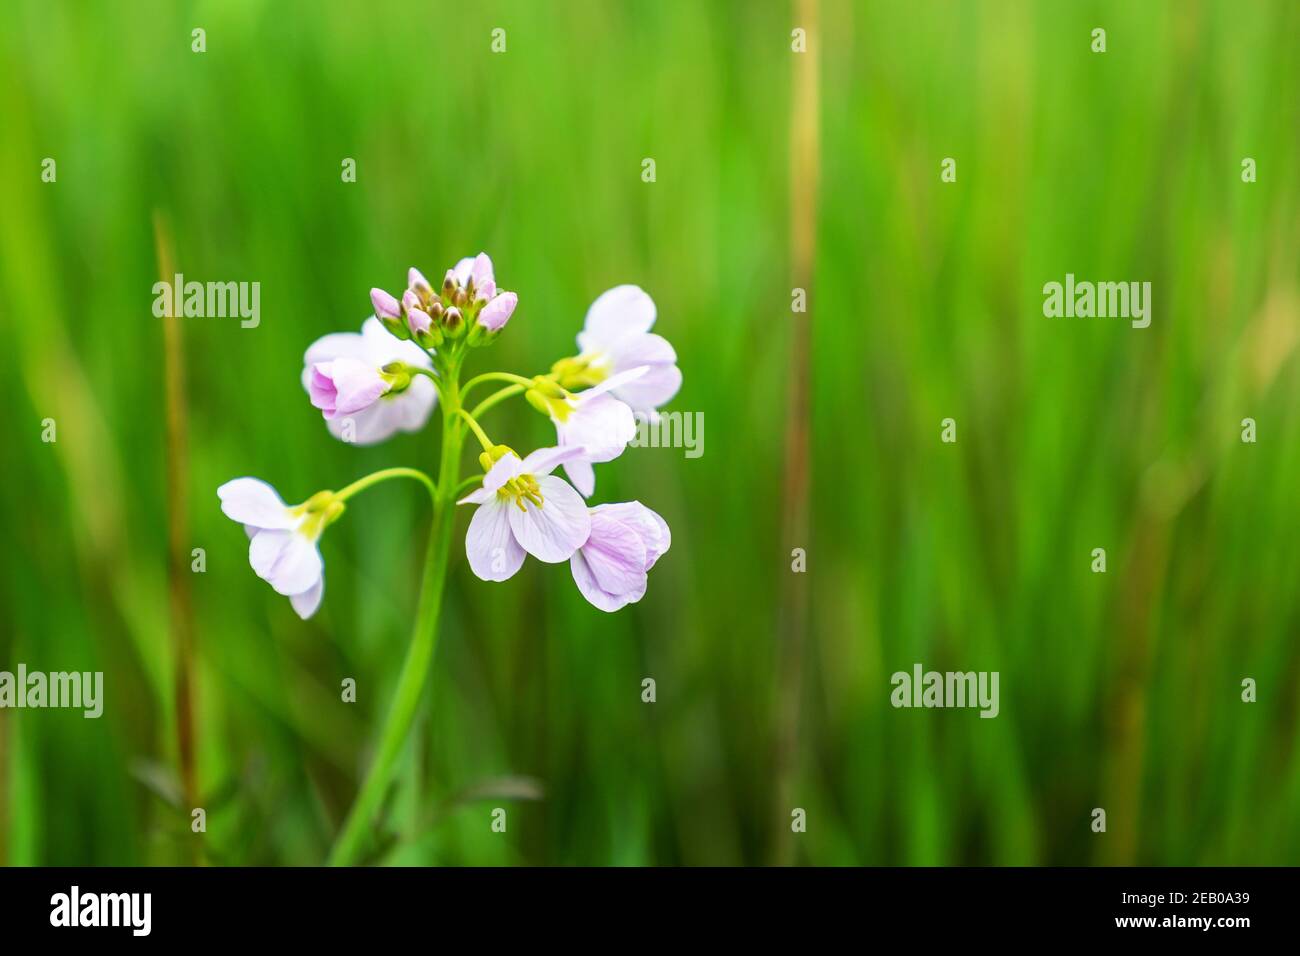 A flower head of a Lady's Smock or Cuckoo Flower, (Cardamine pratensis), Staffordshire, England, UK Stock Photo